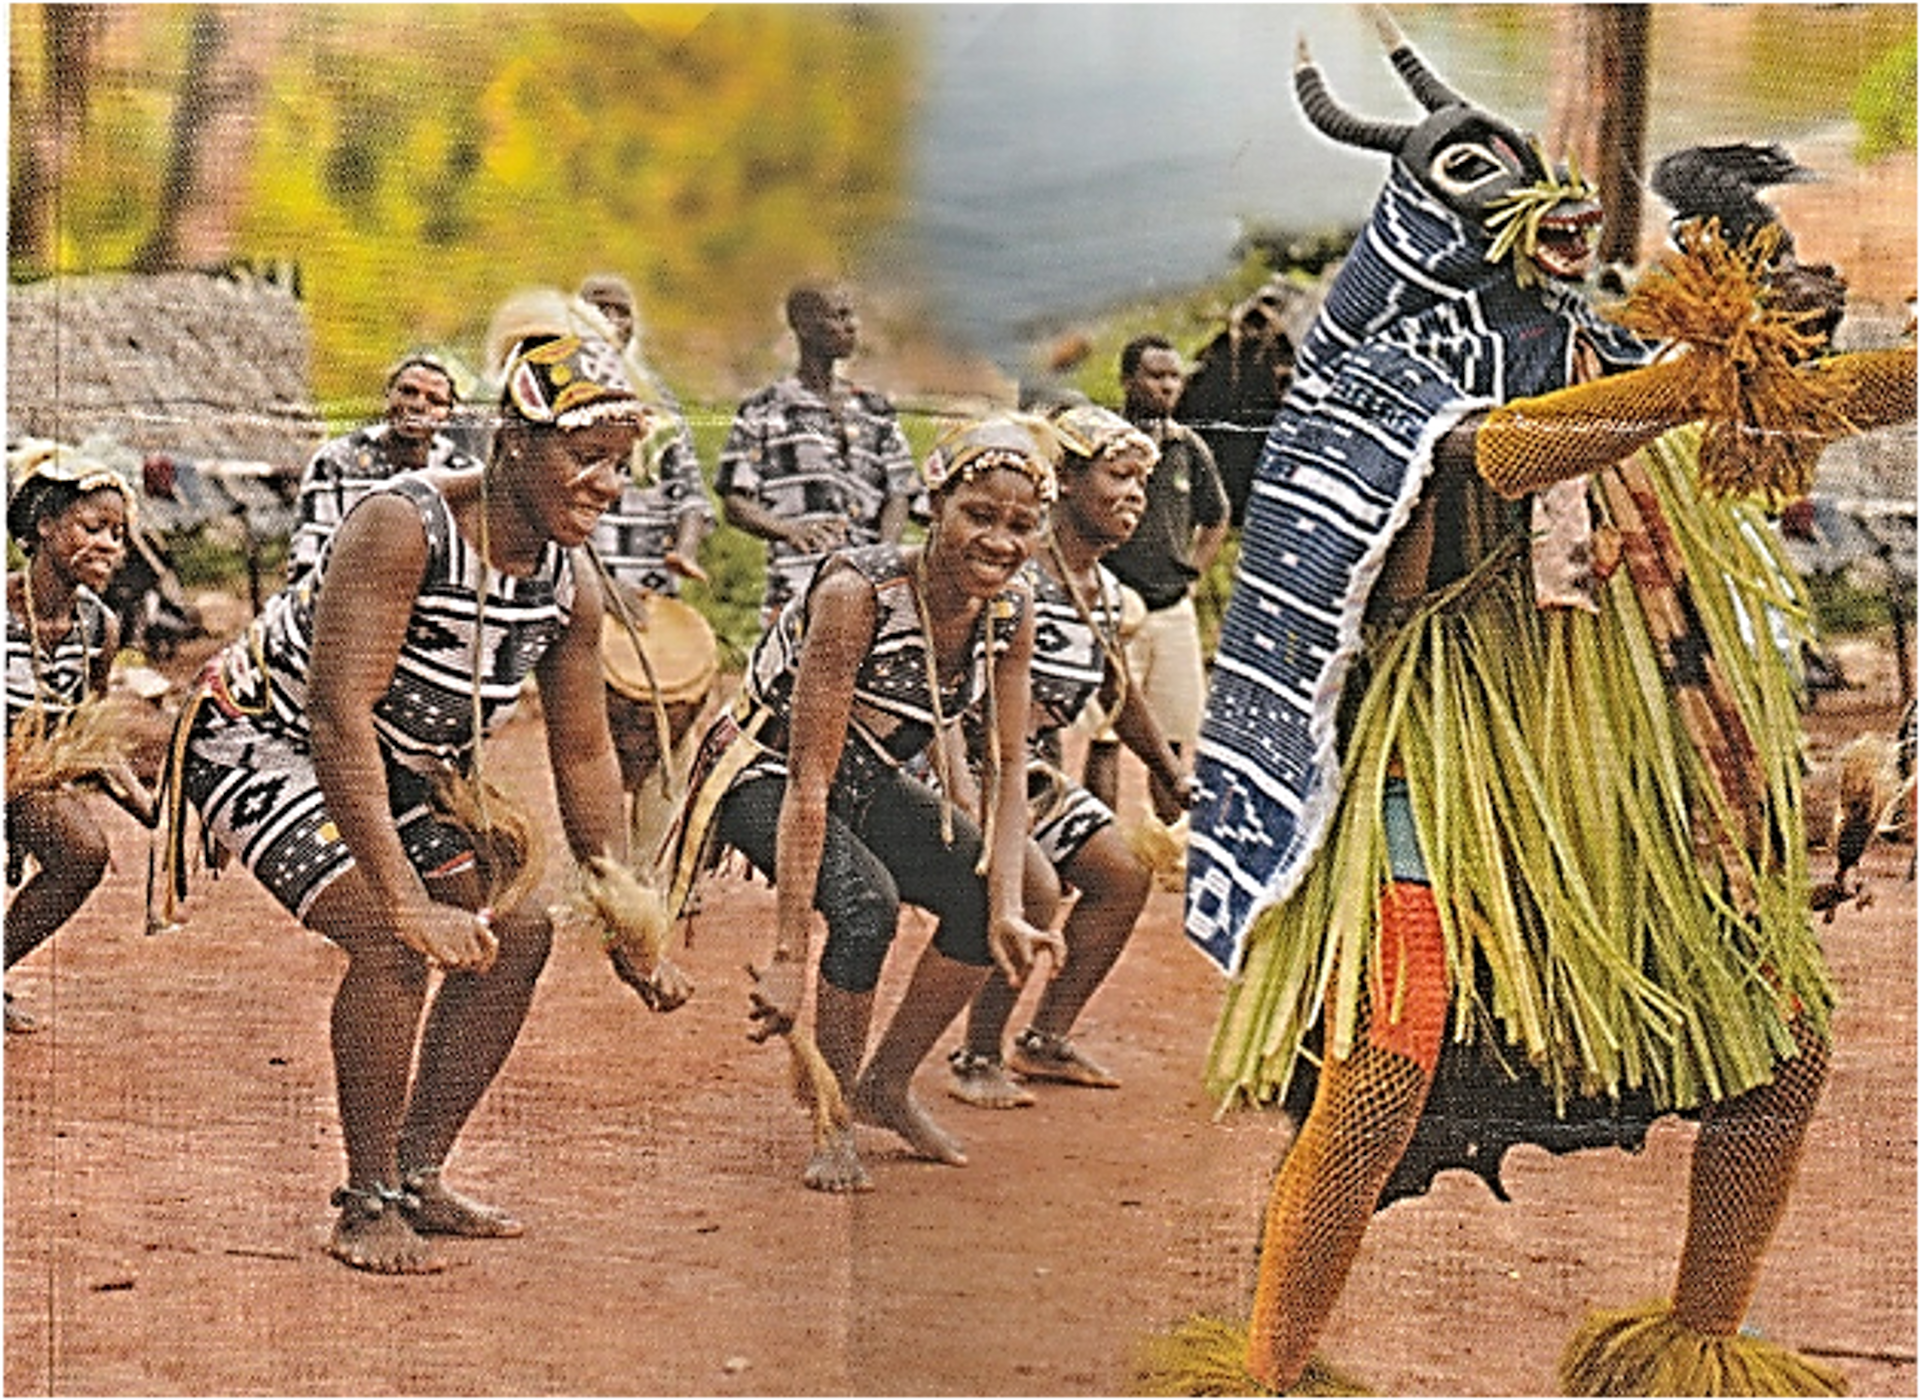 How can we learn from African dance traditions and perspectives for a sustainable and peaceful life?